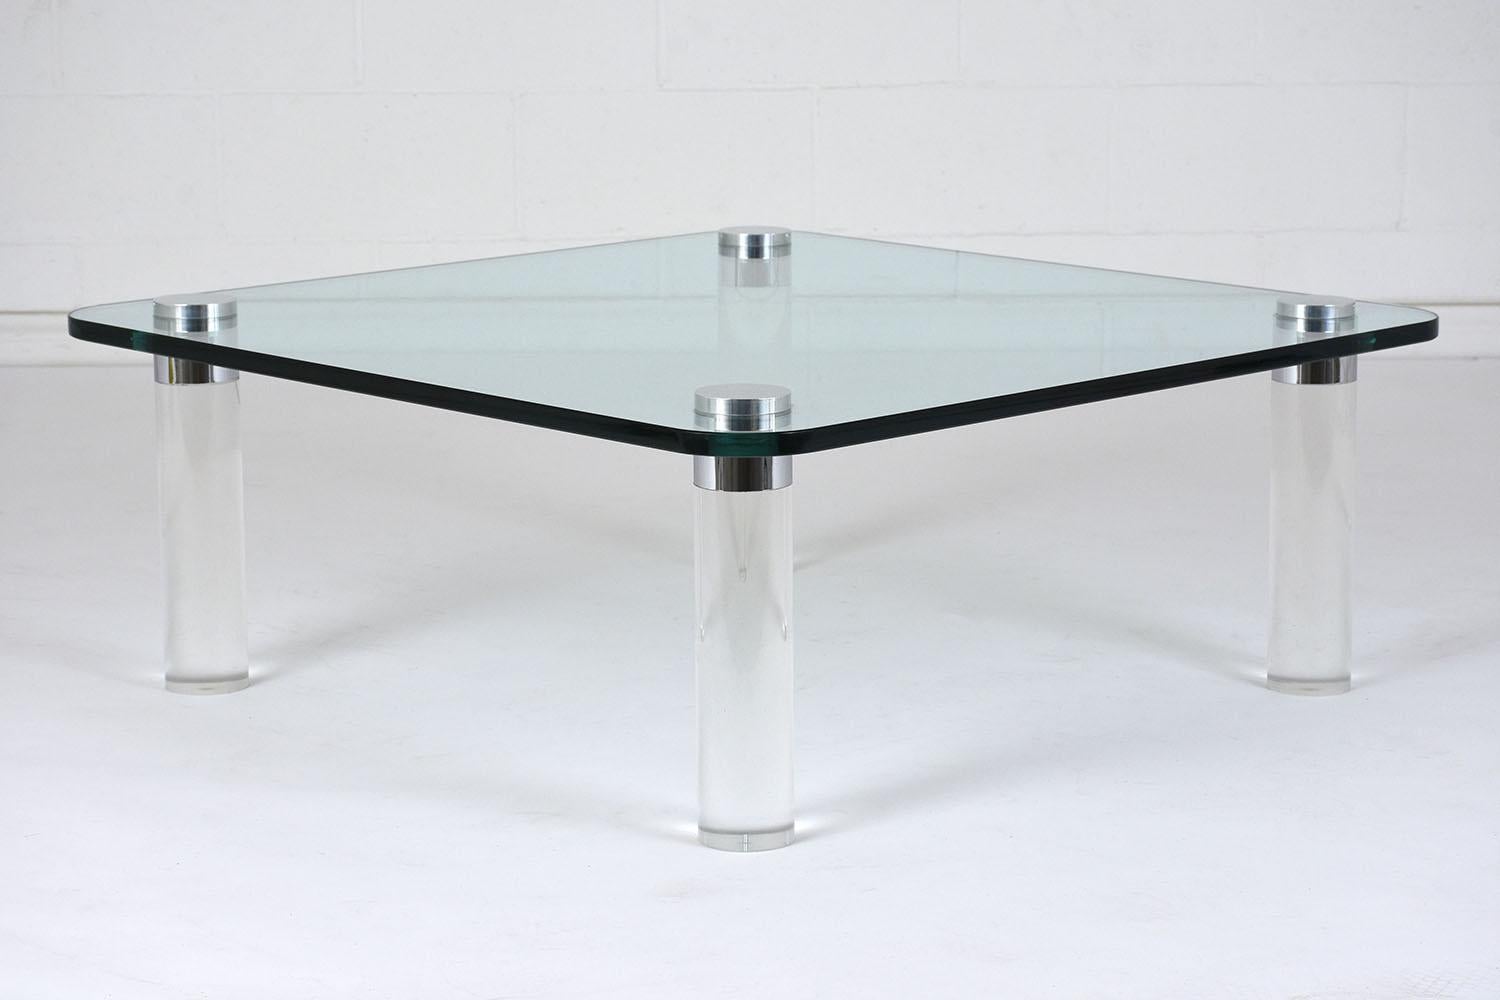 Vintage Restored 1960s Mid-Century Modern Lucite & Glass Cocktail Table In Good Condition For Sale In Los Angeles, CA